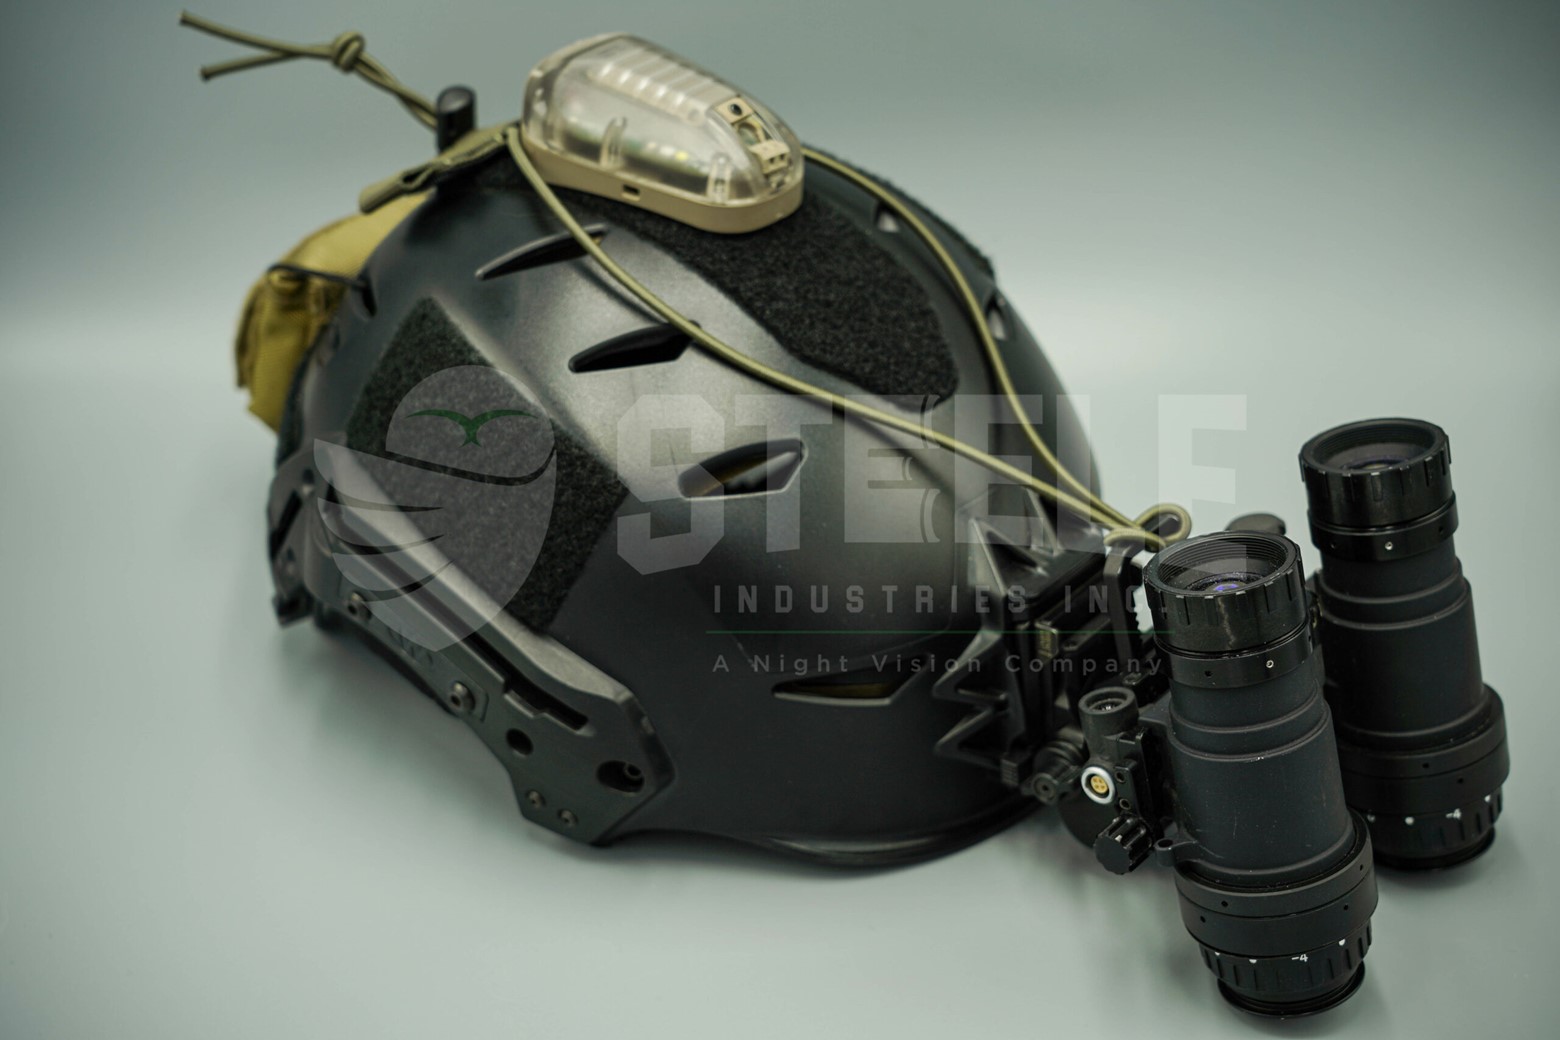 New to Night Vision? Here&#8217;s How to Buy NVG Equipment and Get the Best Value, Steele Industries Inc